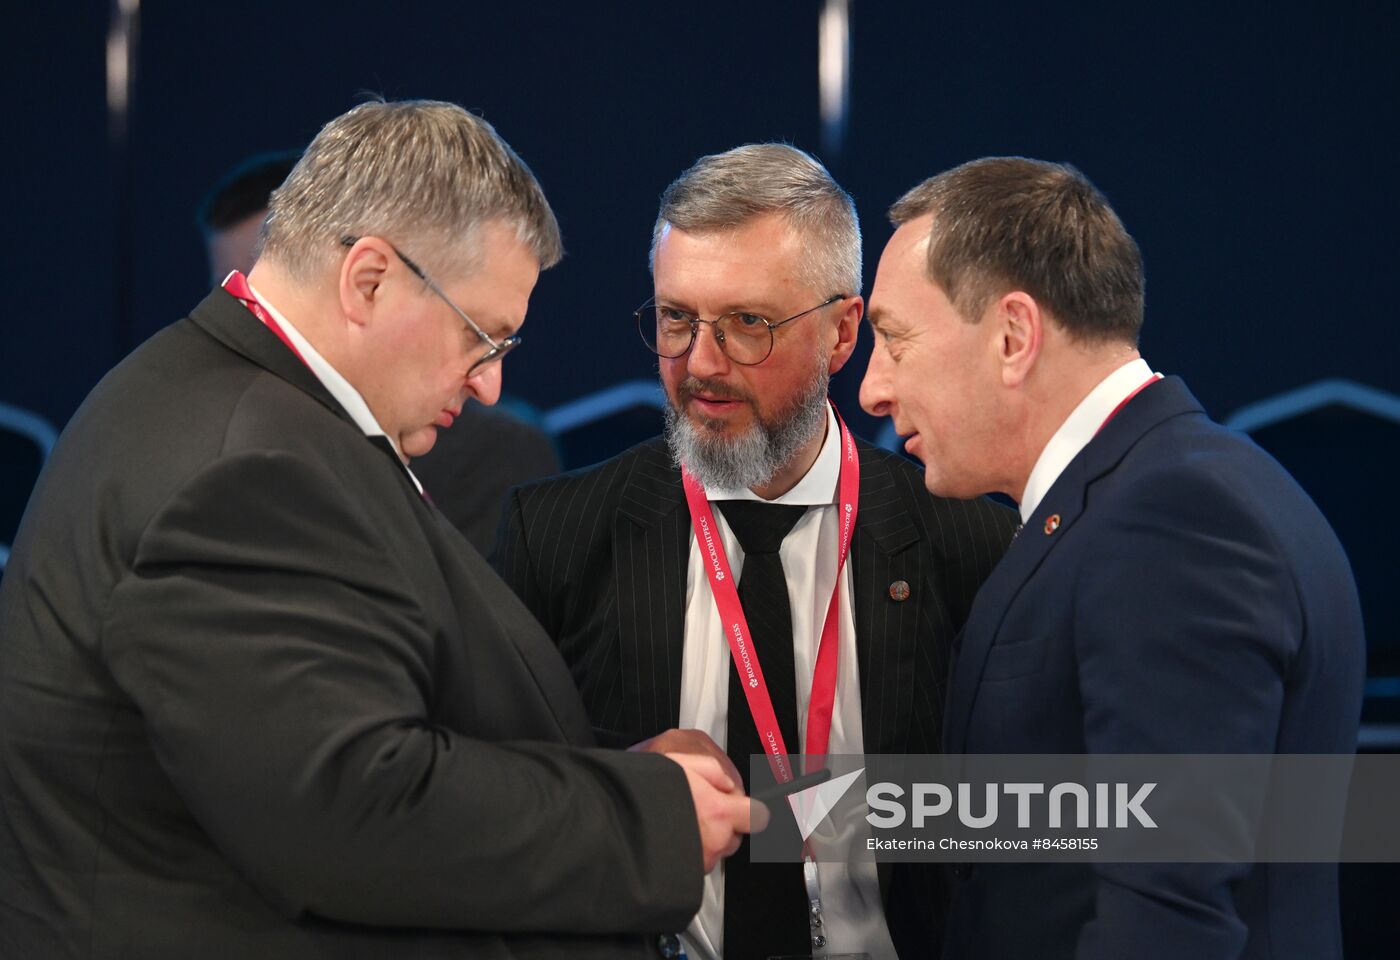 SPIEF-2023. The Union State of Russia And Belarus: Strategy for Interaction